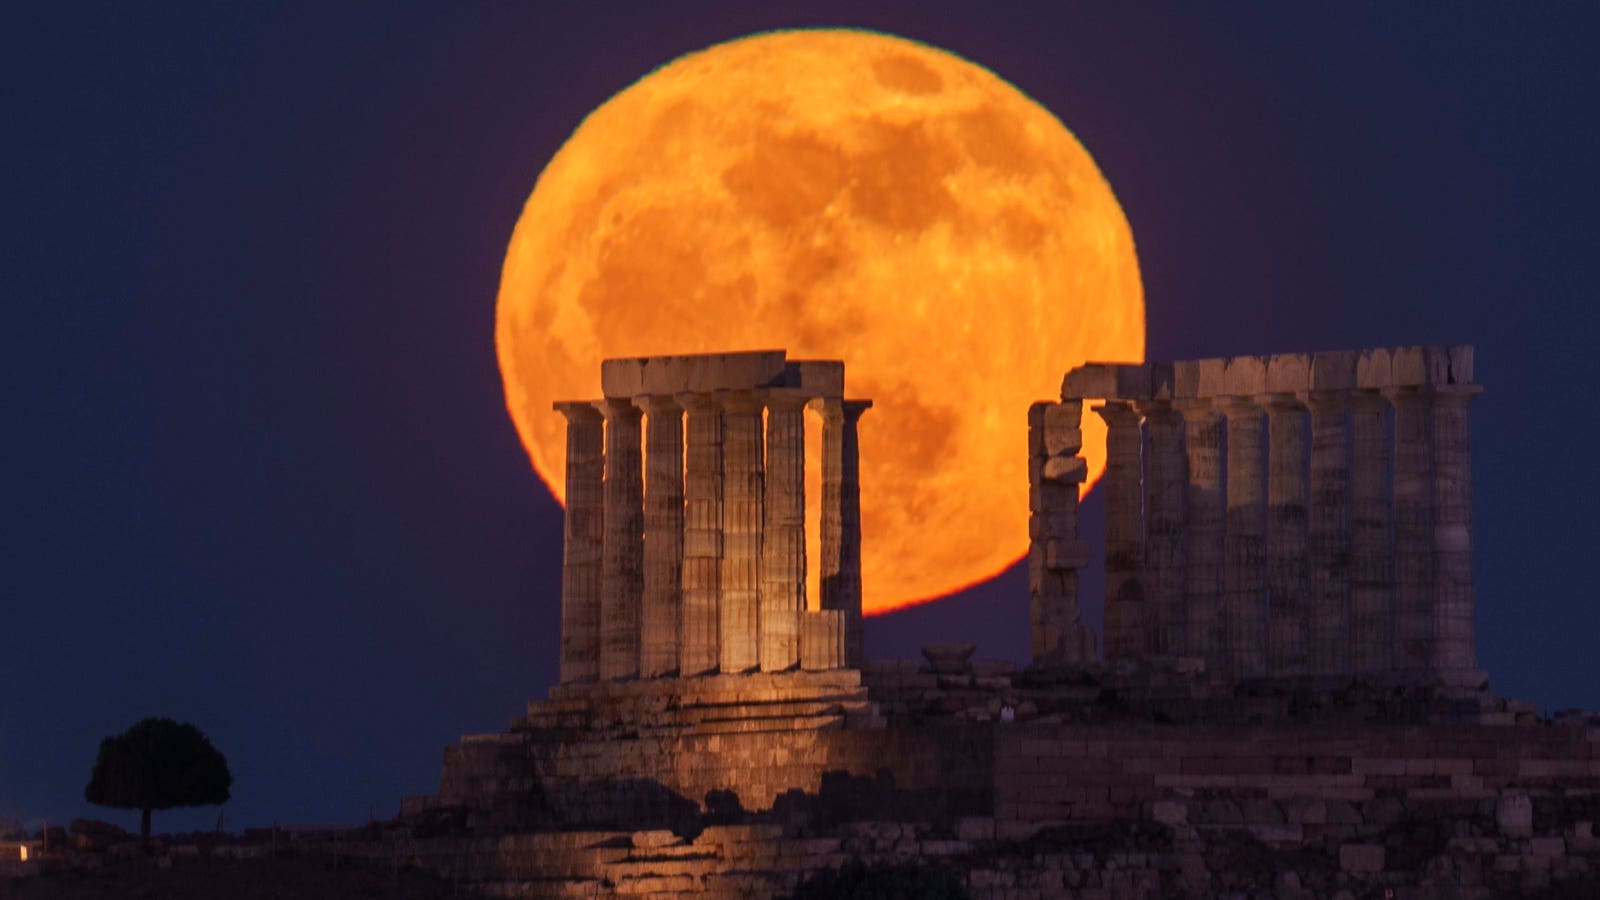 In Photos: Watch The Full ‘Flower Moon’ And A Massive Red Star Rise